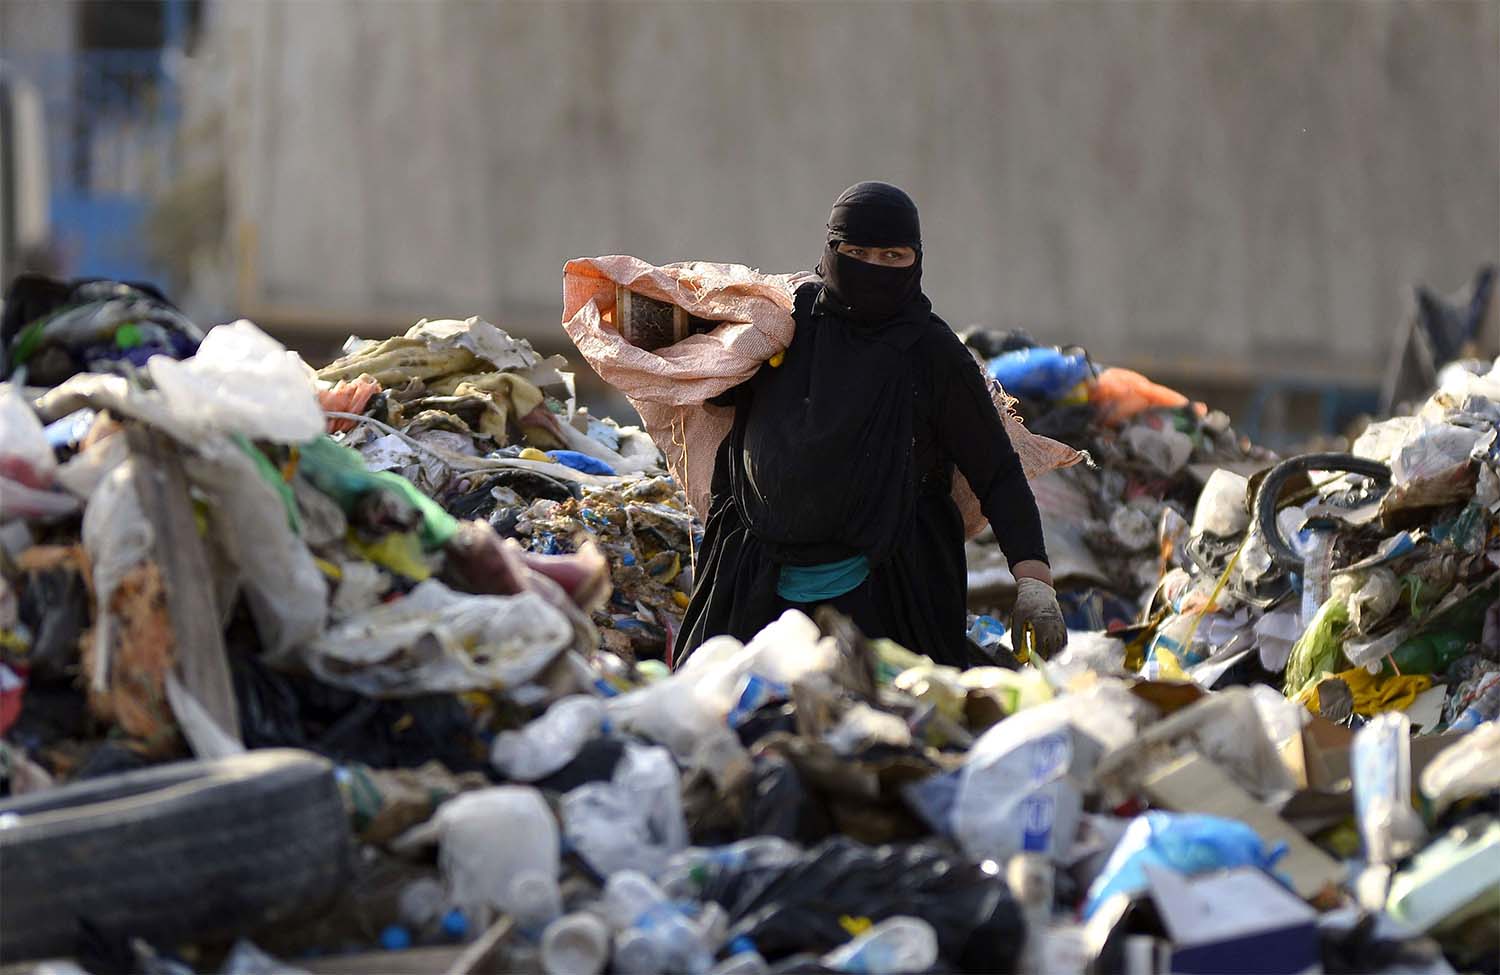 A woman collects recyclable items at a landfill to be sold for extra income in the Iraqi holy city of Najaf 